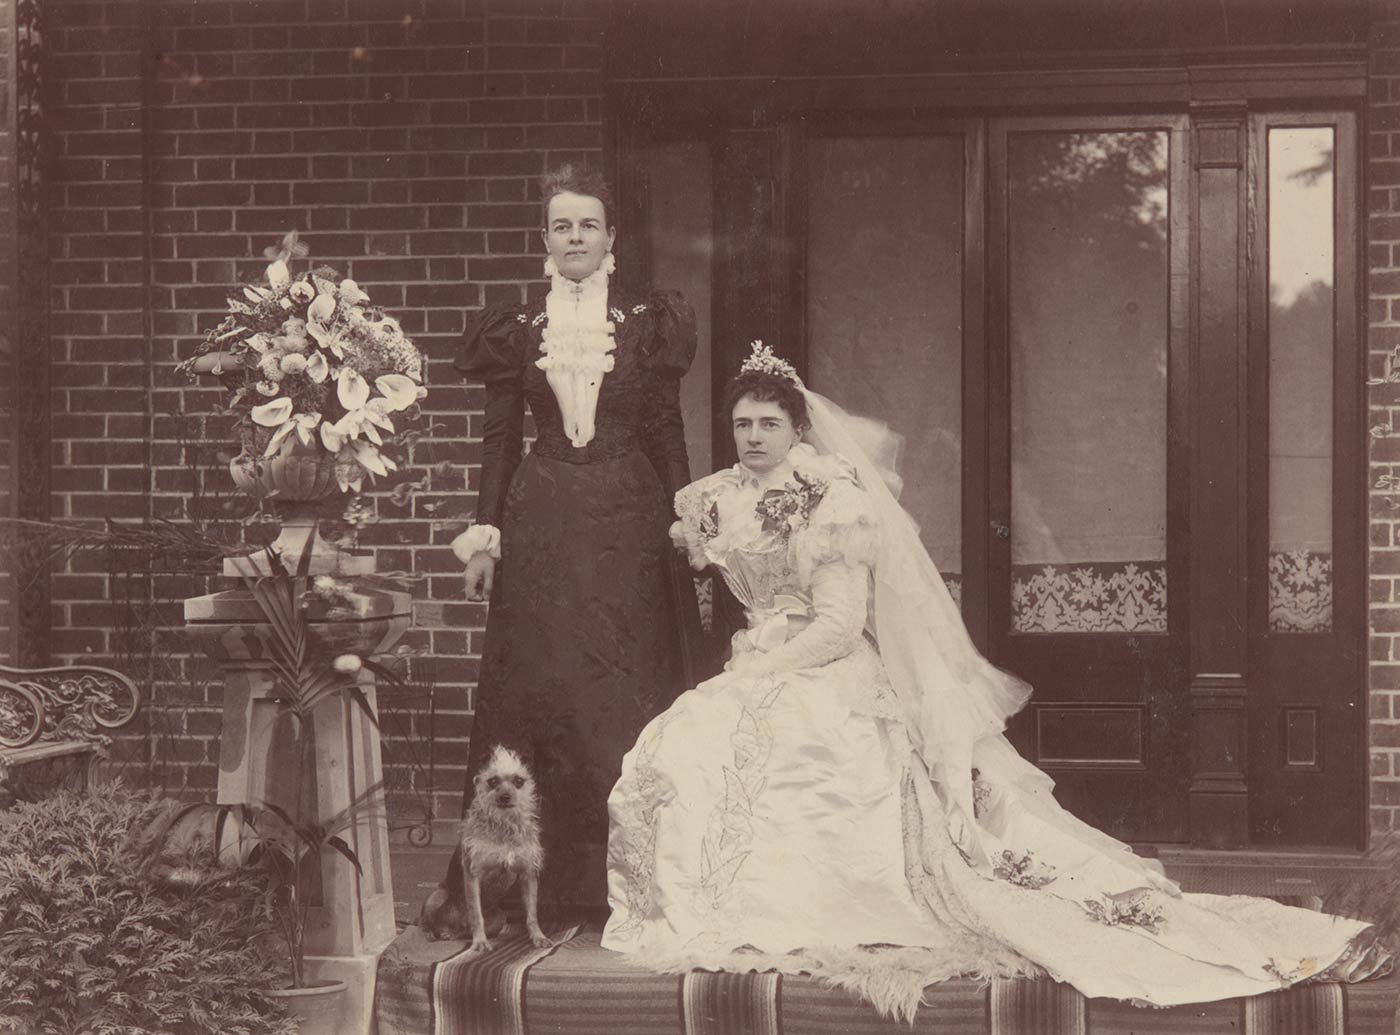 Black and white photo of a woman in a wedding dress and veil, seated. A woman in a dark dress stands at her left. A small terrier dog sits at her feet. - click to view larger image